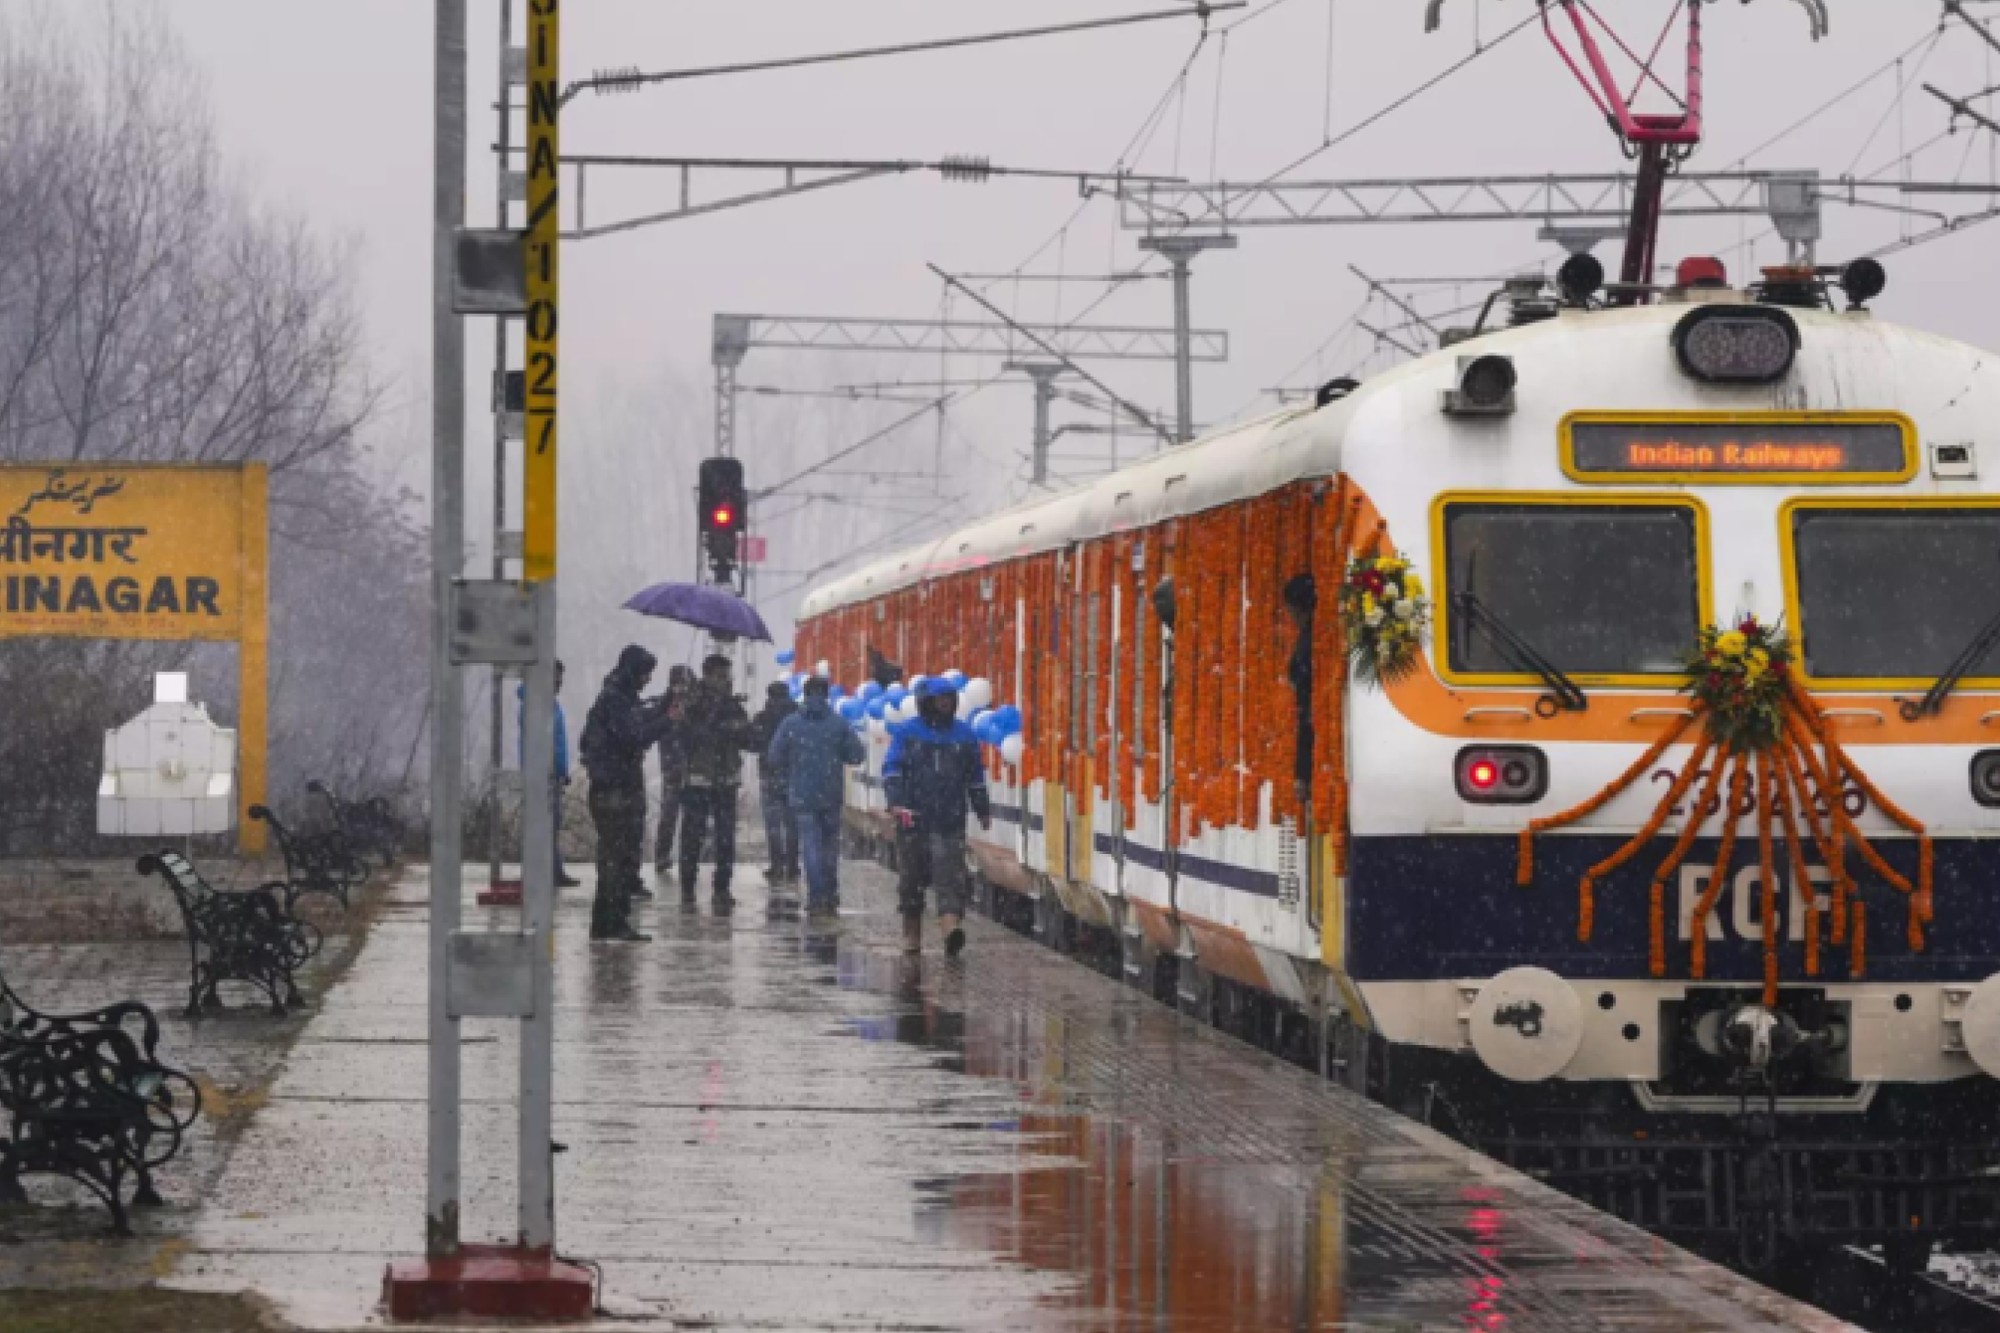 Prime Minister Narendra Modi has inaugurated significant railway projects worth over ₹16,000 crore in Jammu and Kashmir